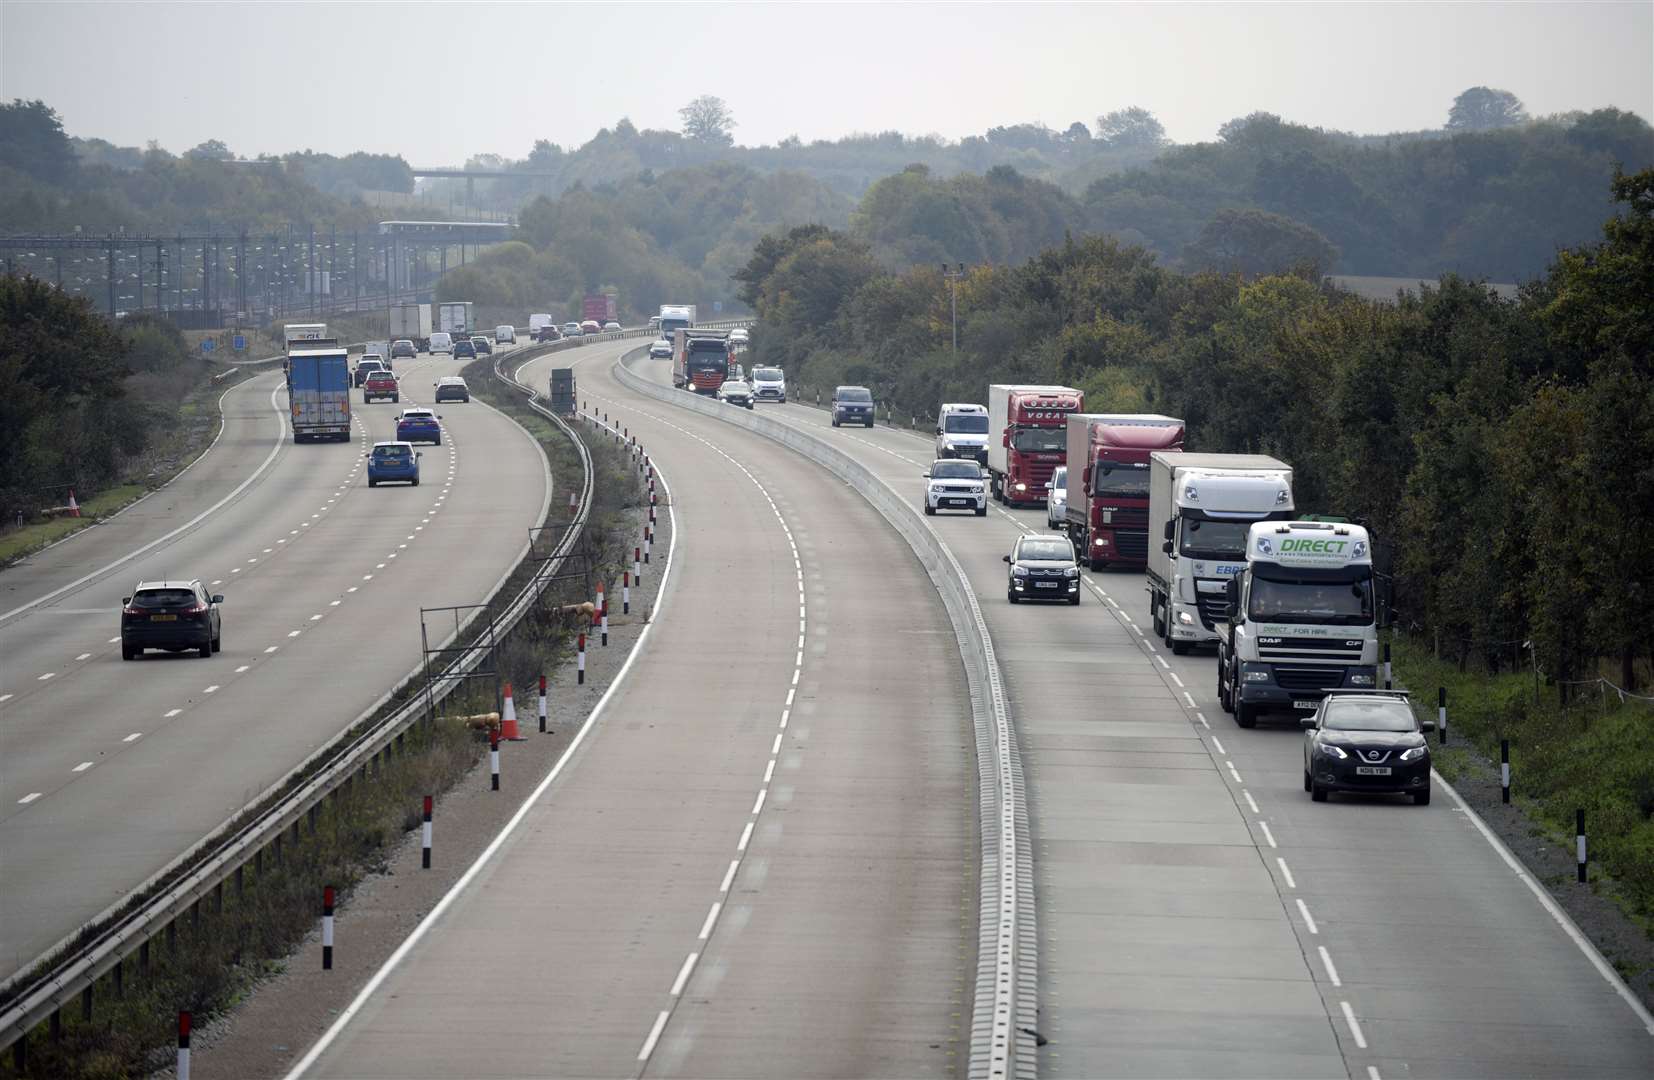 Drivers have faced narrow lanes and a 50mph limit on the M20 for months. Picture: Barry Goodwin